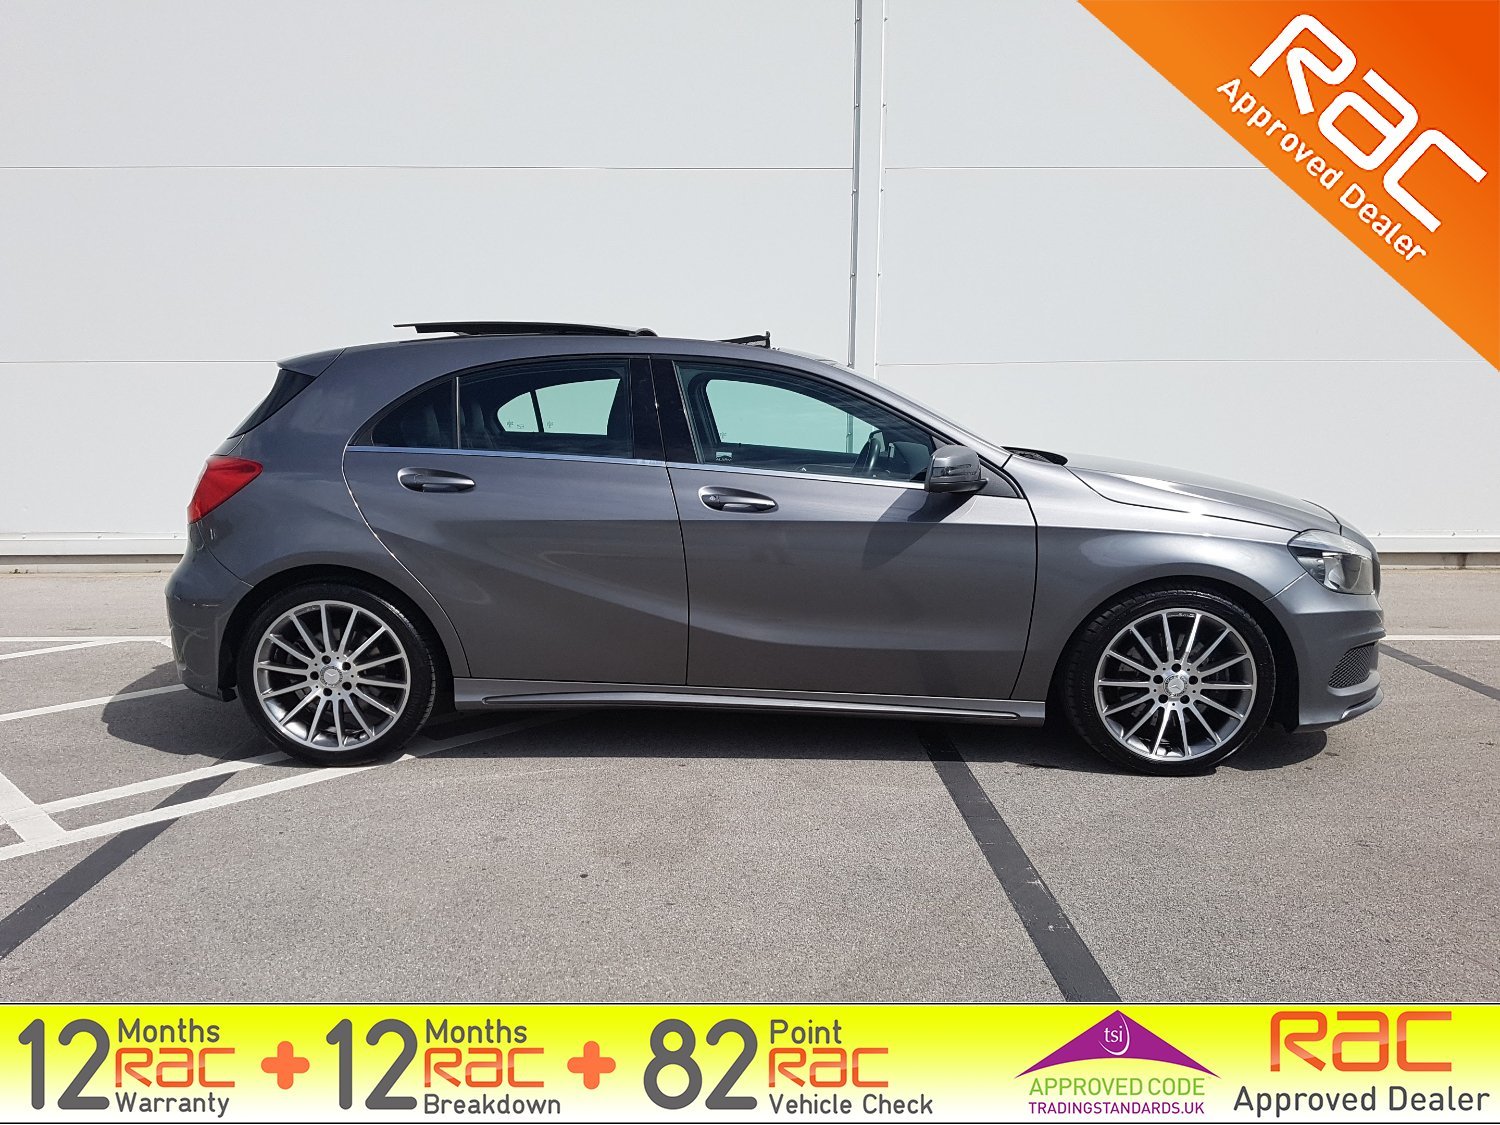 Used MERCEDES-BENZ A CLASS in Bradford, West Yorkshire | Blackstone ...